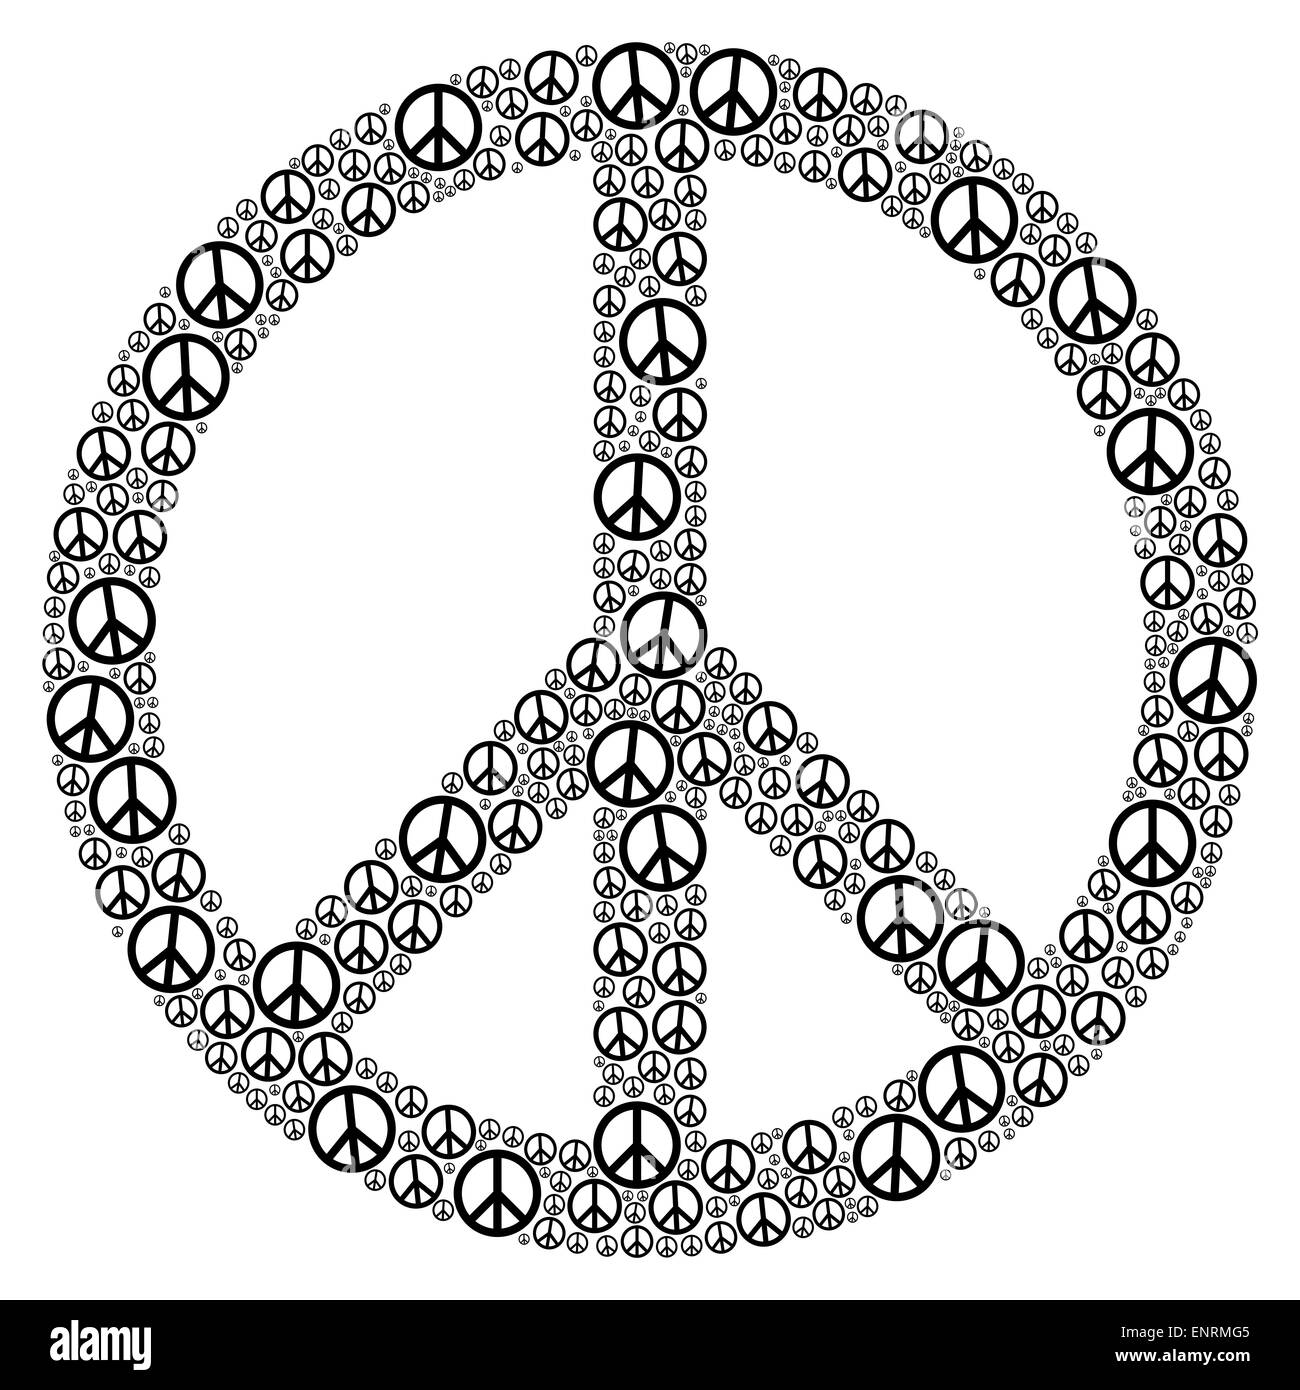 Peace sign symbol Black and White Stock Photos & Images - Alamy